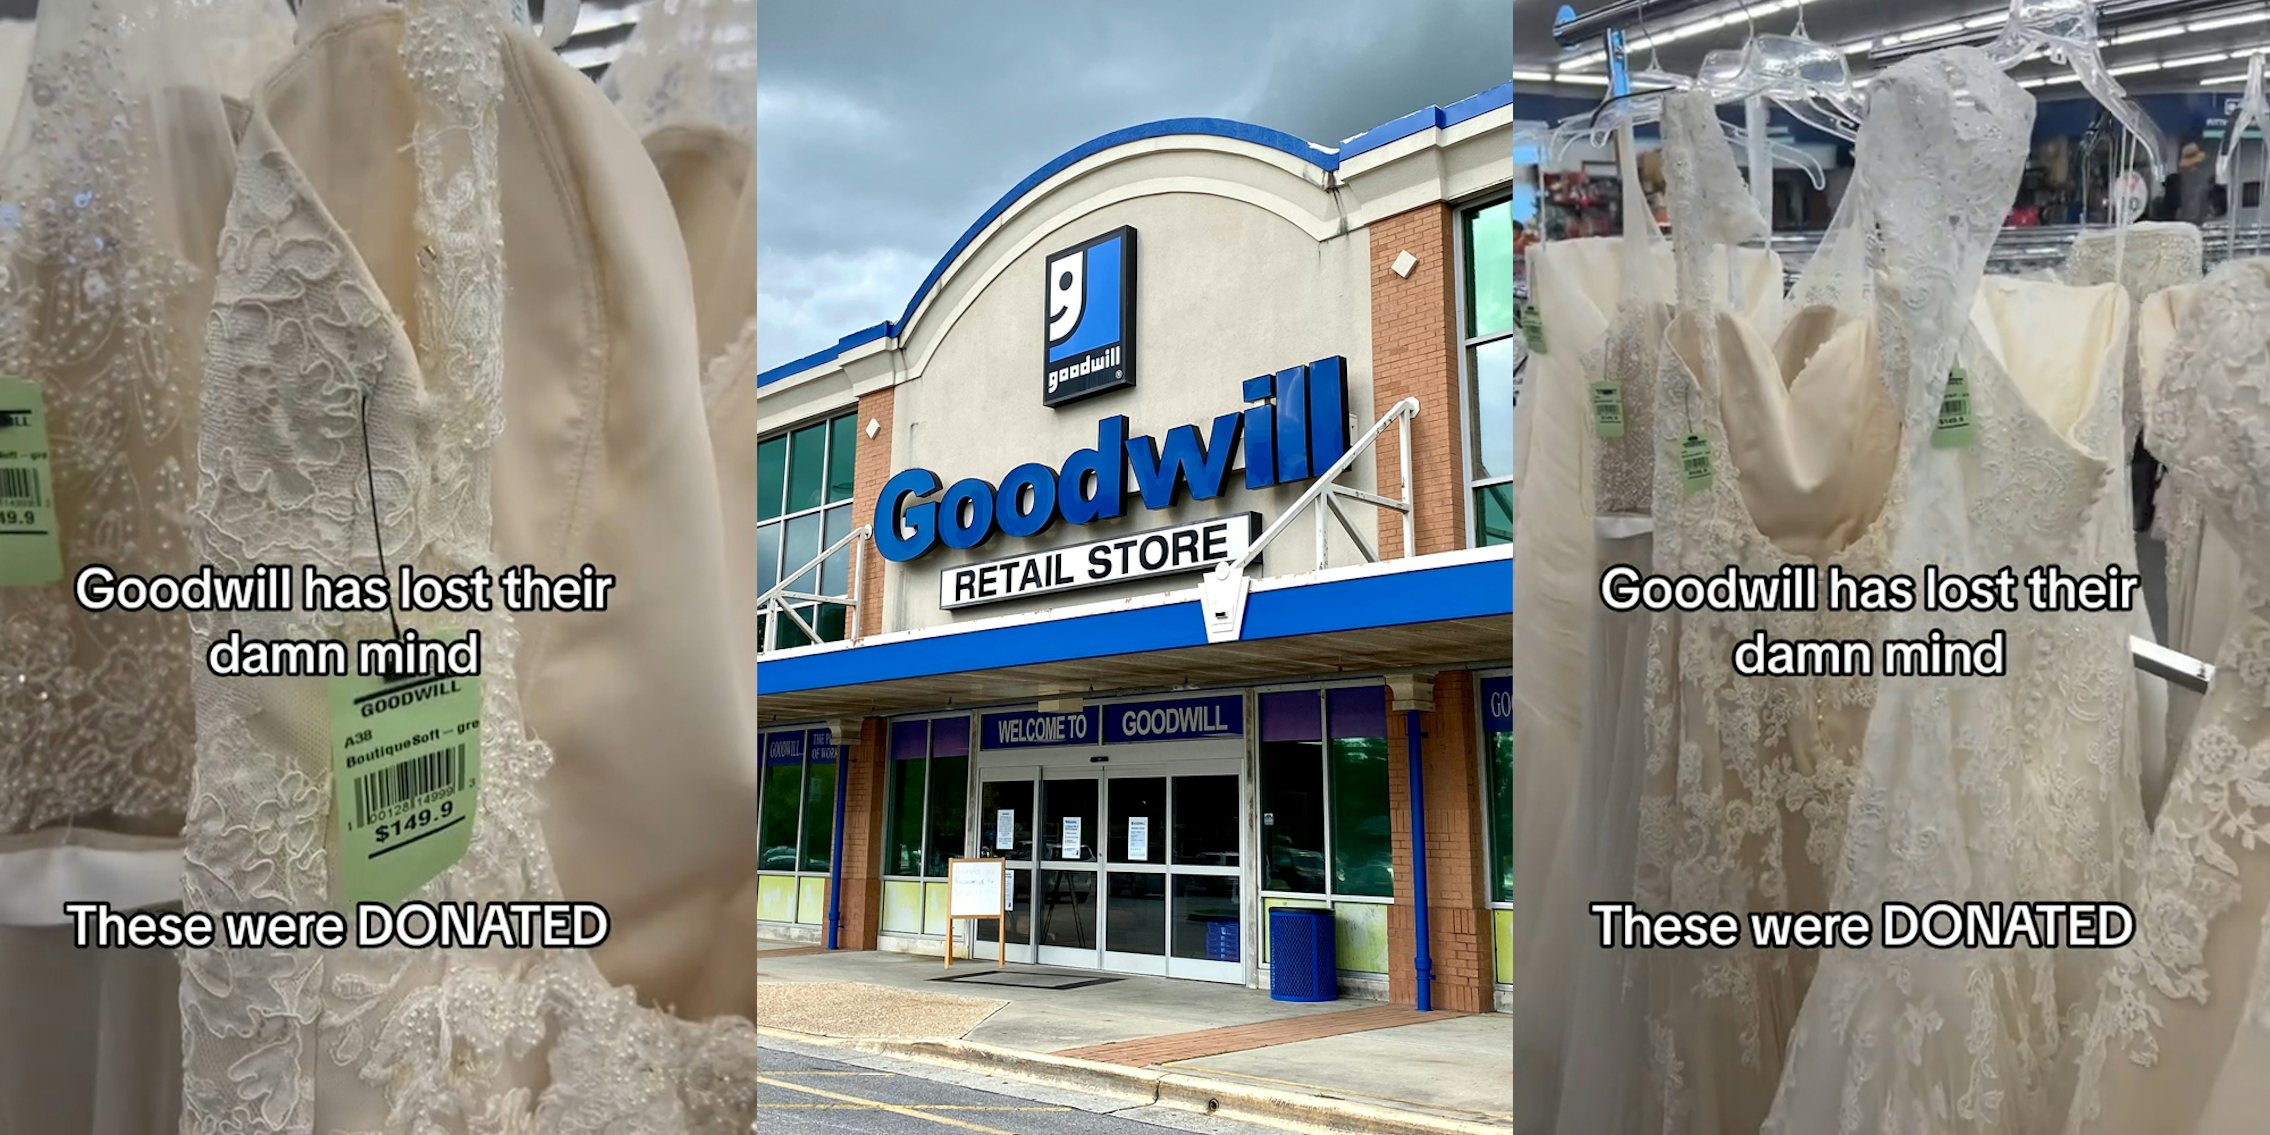 Goodwill wedding dresses on rack with caption 'Goodwill lost their damn mind these were DONATED' (l) Goodwill building with sign (c) Goodwill wedding dresses on rack with caption 'Goodwill lost their damn mind these were DONATED' (r)